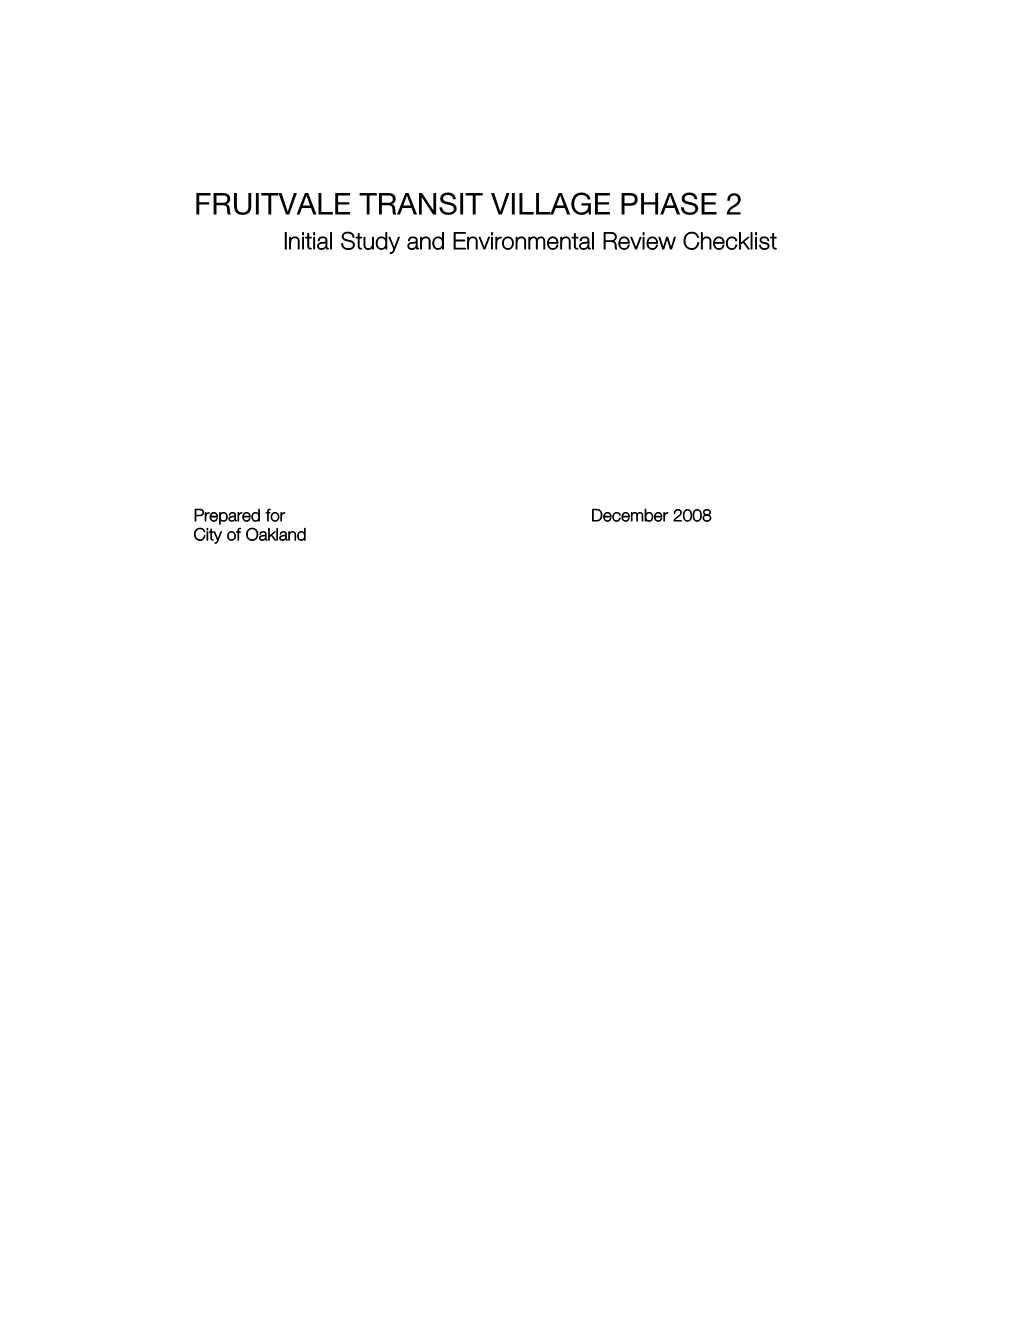 FRUITVALE TRANSIT VILLAGE PHASE 2 Initial Study and Environmental Review Checklist